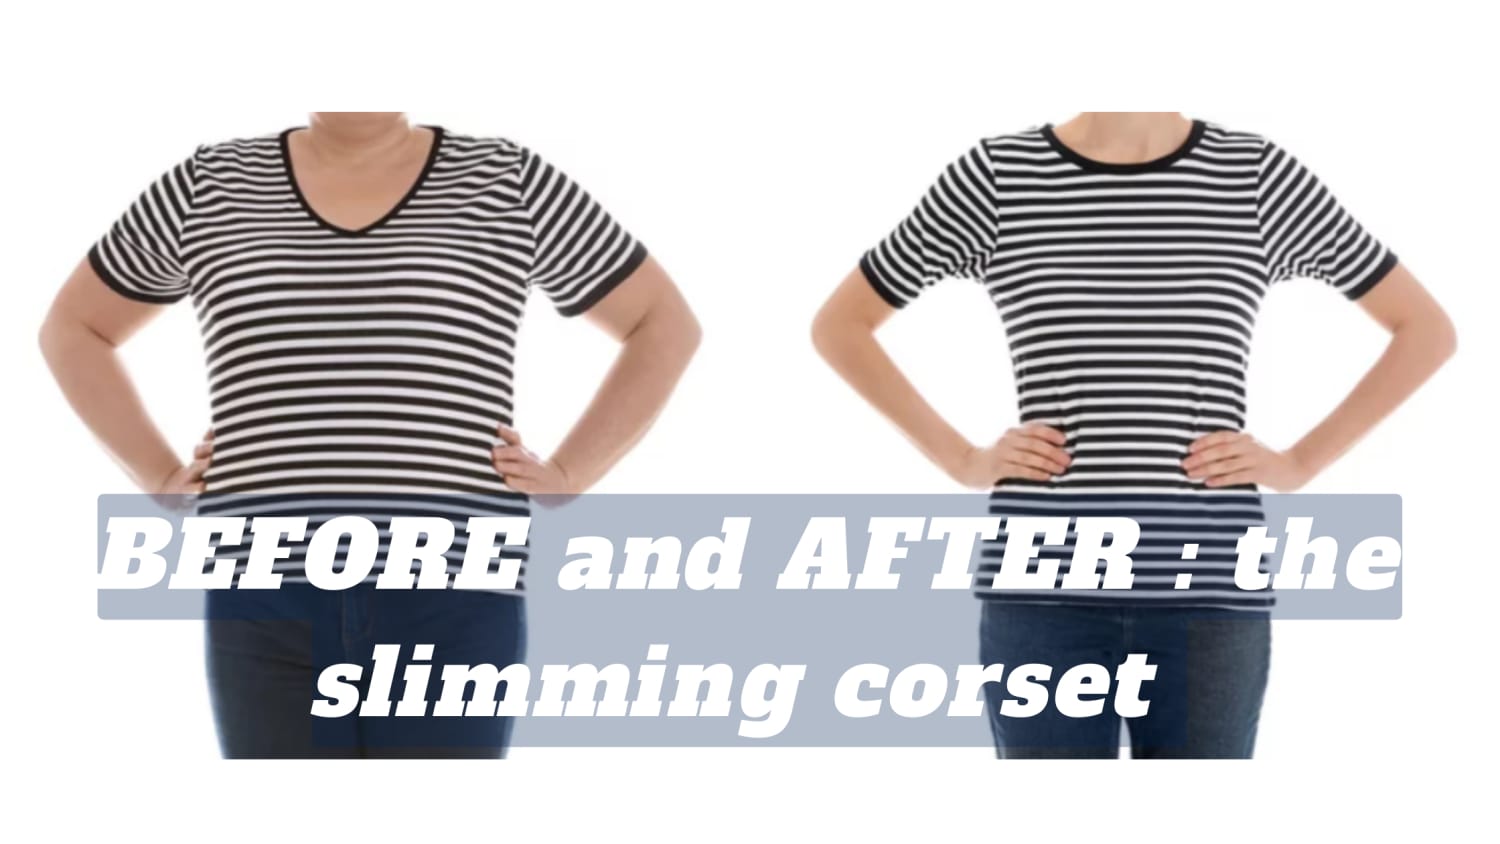 Slimming corset: BEFORE and AFTER